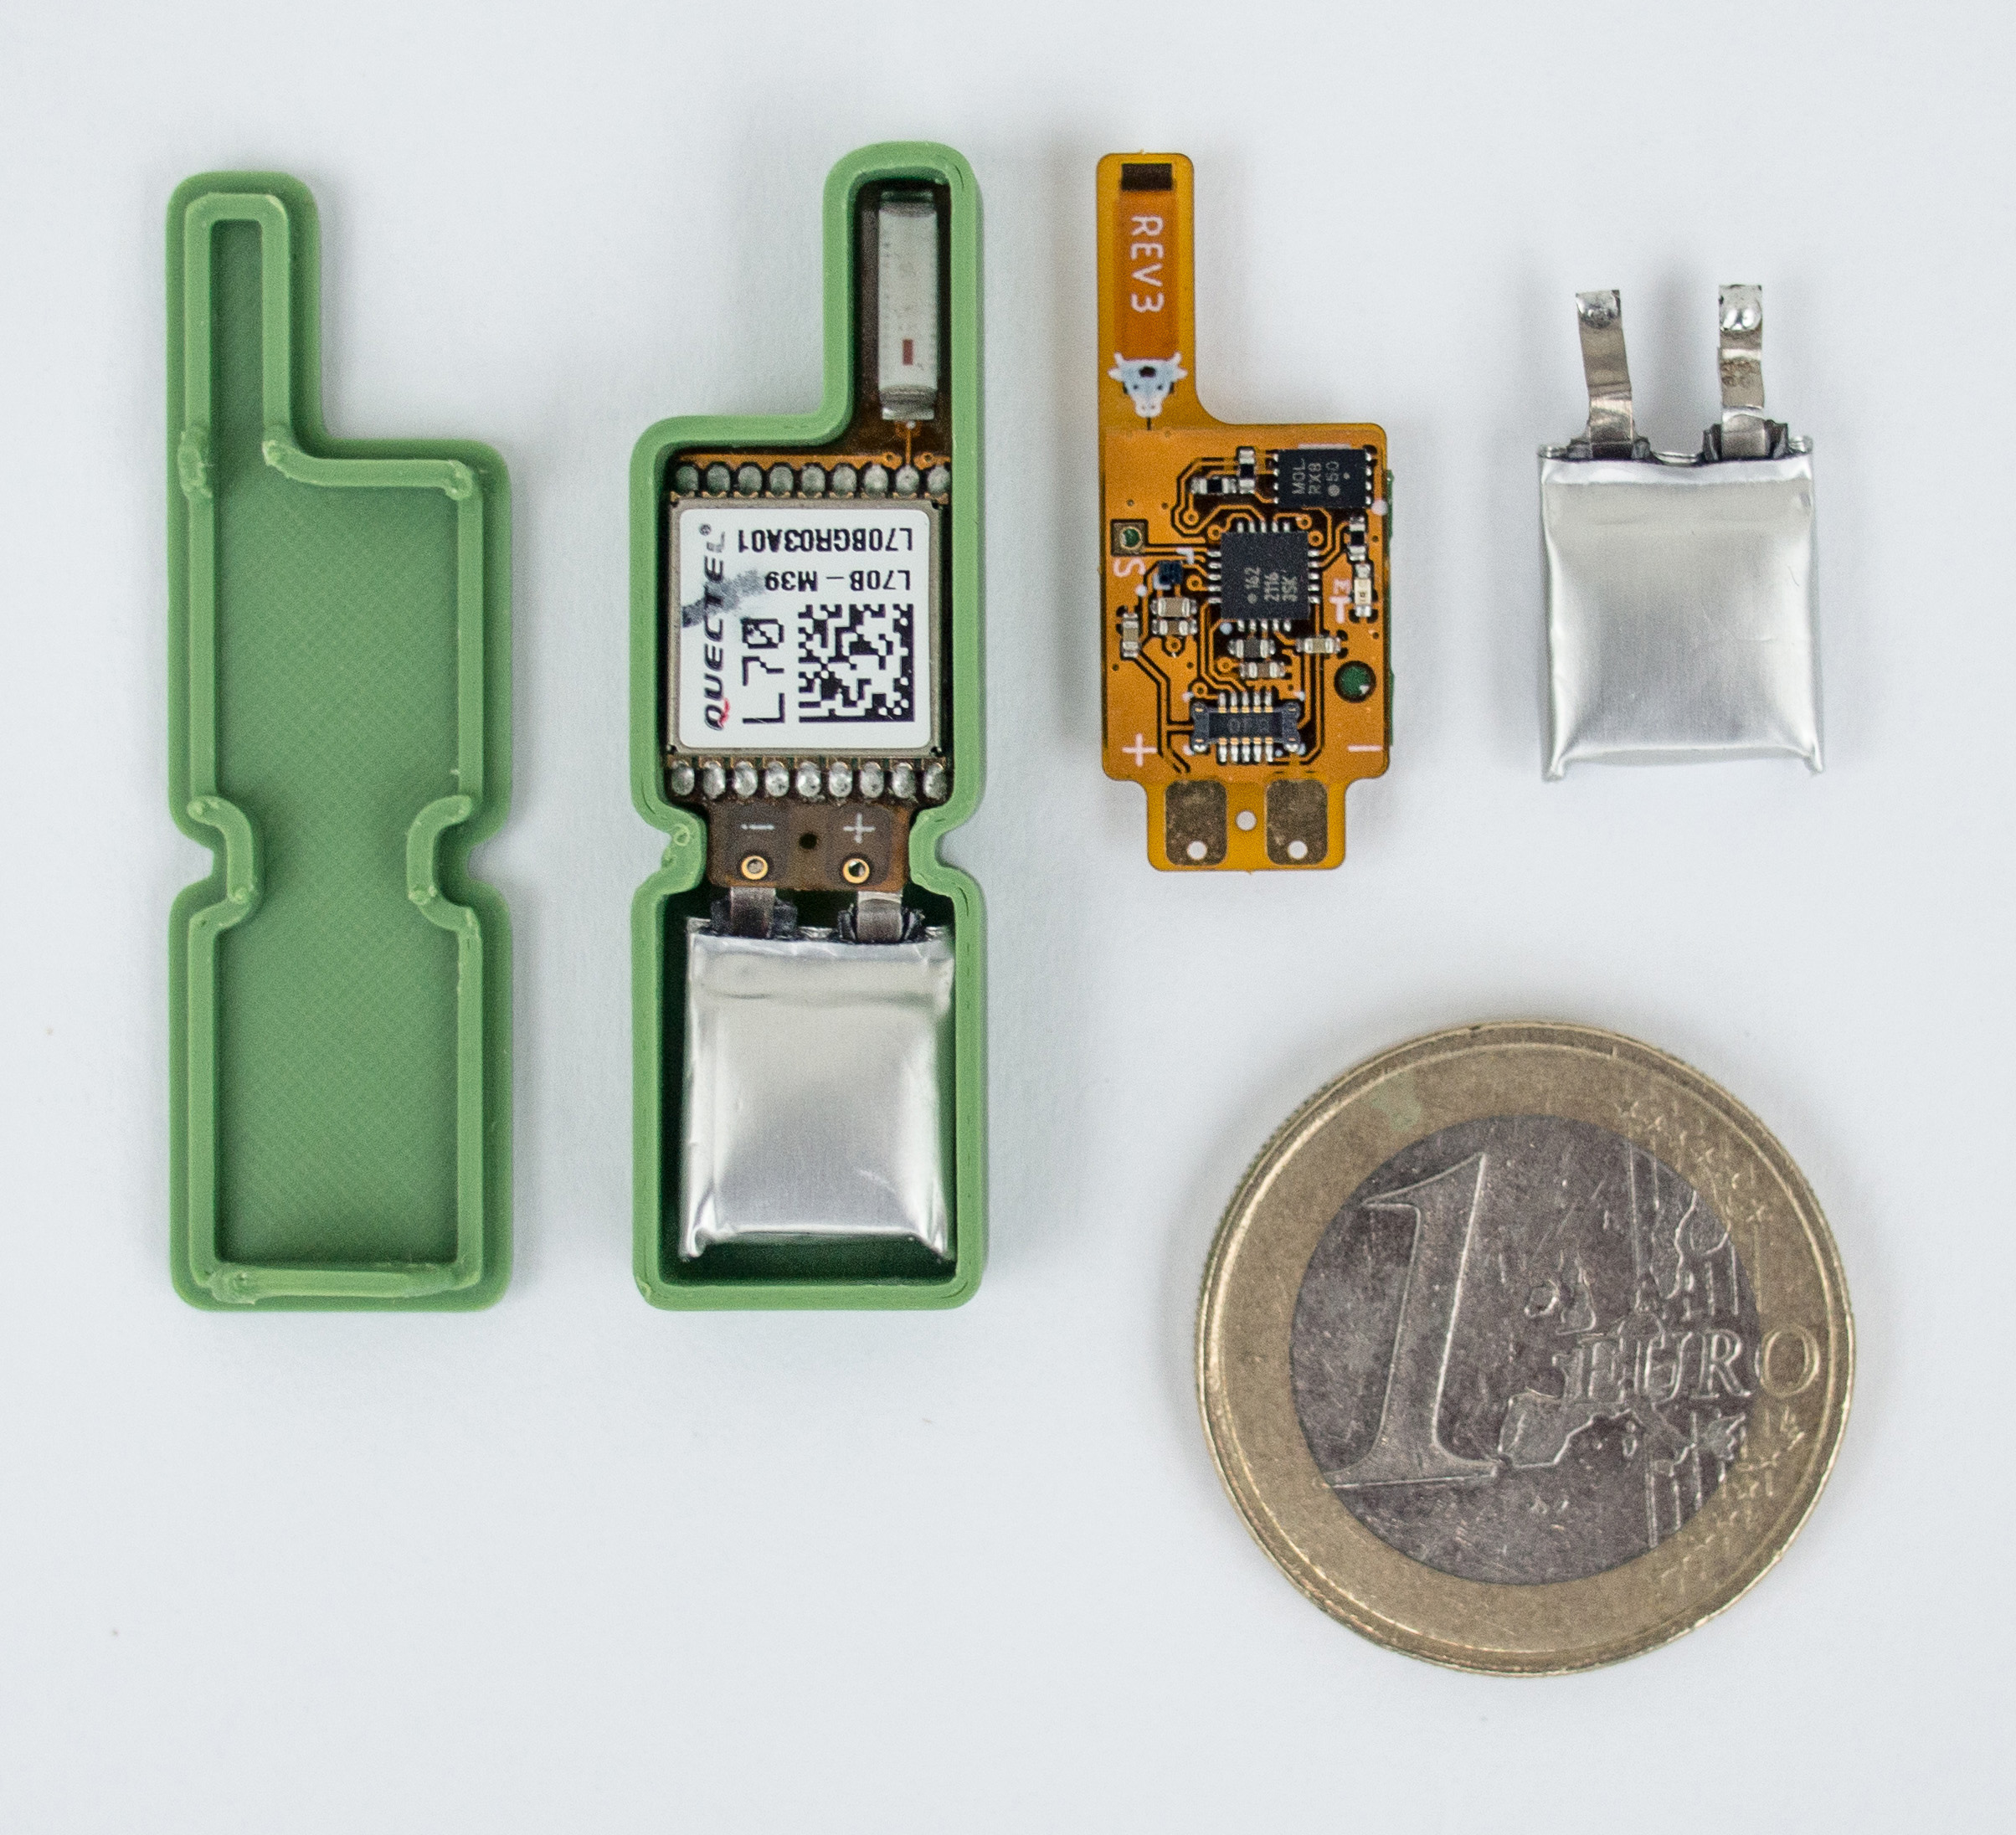 TickTagOpenSource is an Open-Source GPS Logger for Wildlife Tracking